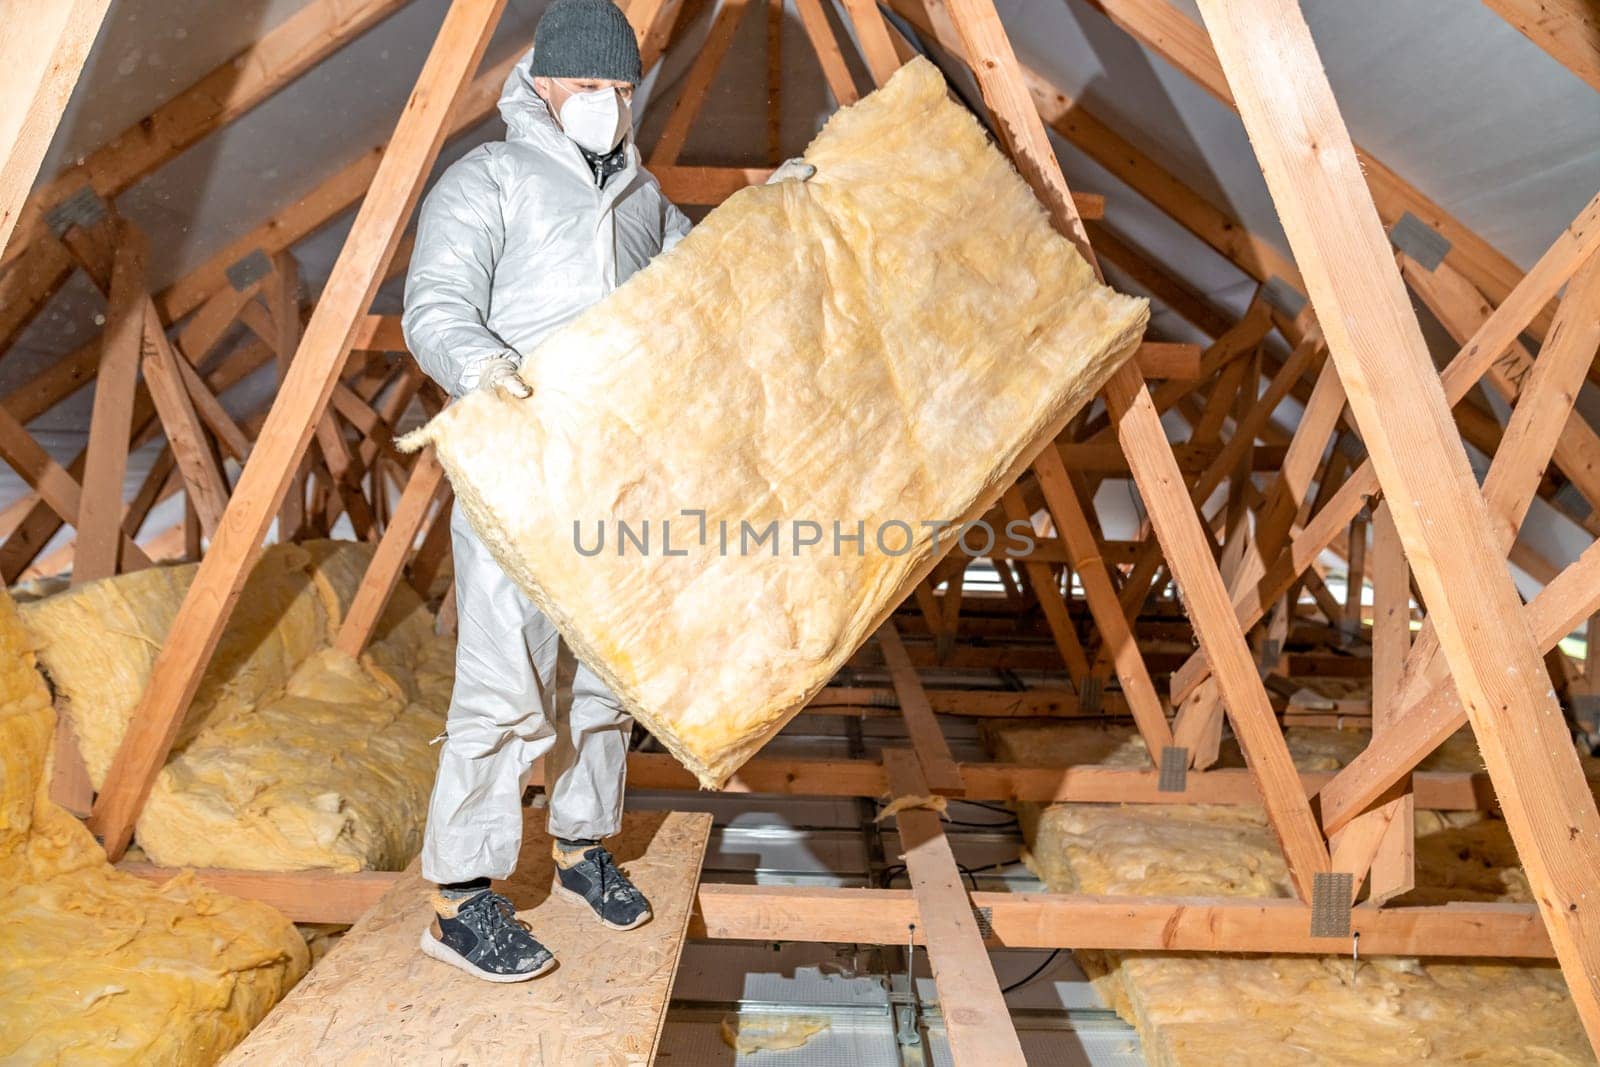 a worker in protective overalls works with glass wool by Edophoto